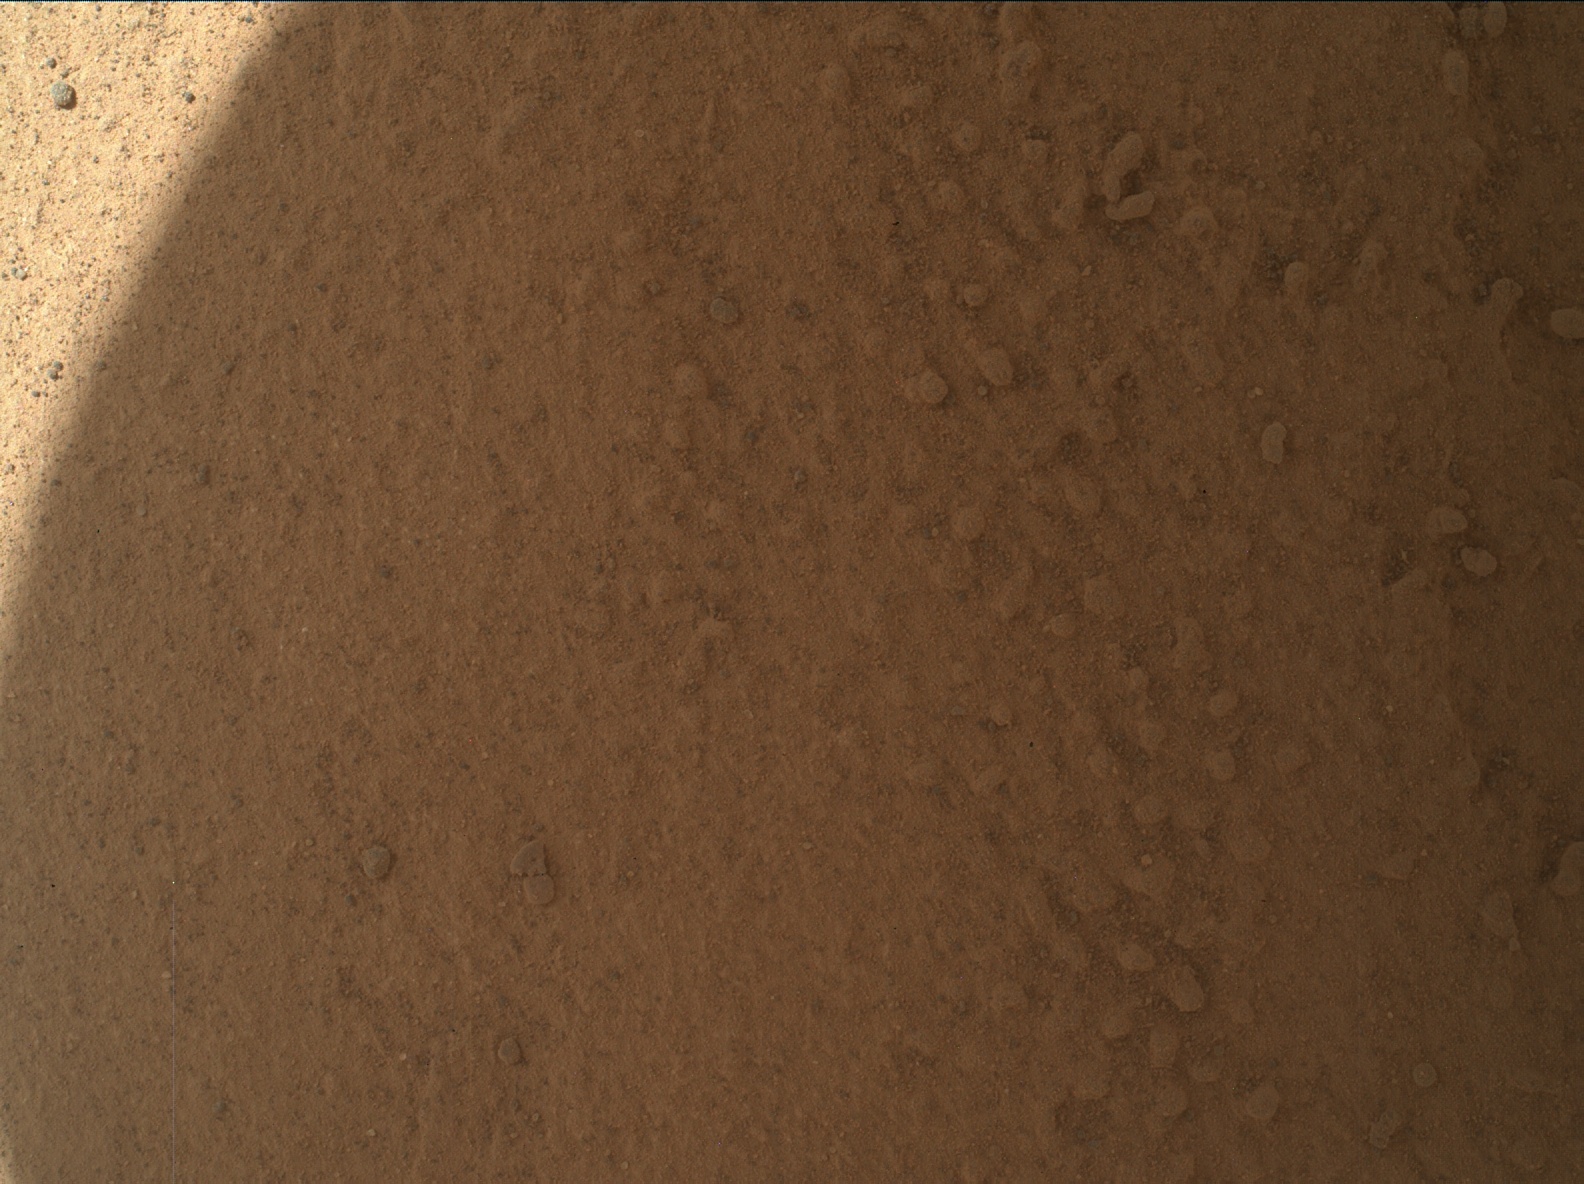 Nasa's Mars rover Curiosity acquired this image using its Mars Hand Lens Imager (MAHLI) on Sol 3212